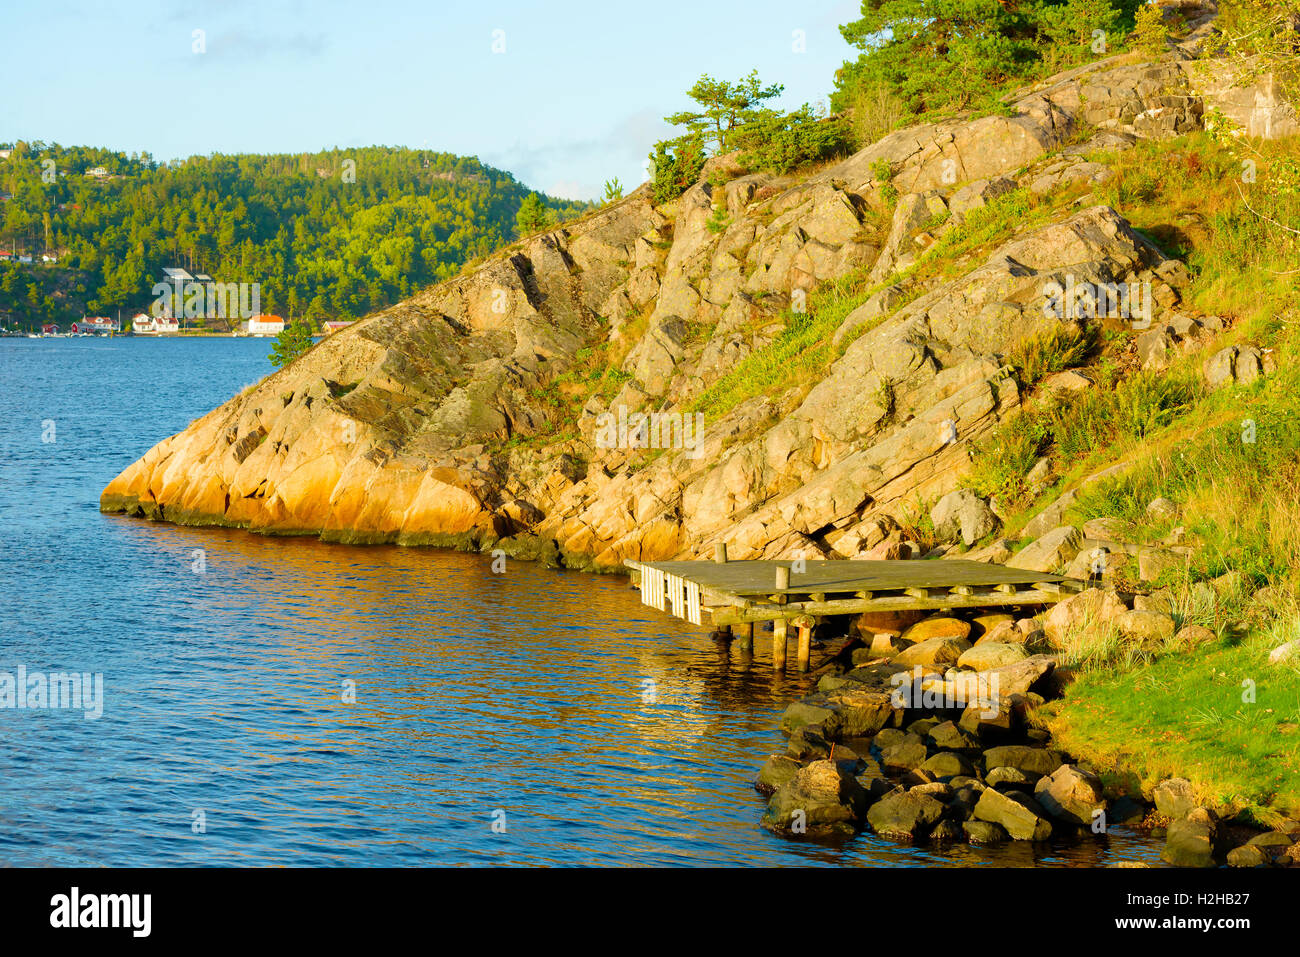 Evening sunshine on wooden pier on rocky shore. Saltbacken in Sweden, close to Norway (the houses and forest in the background). Stock Photo